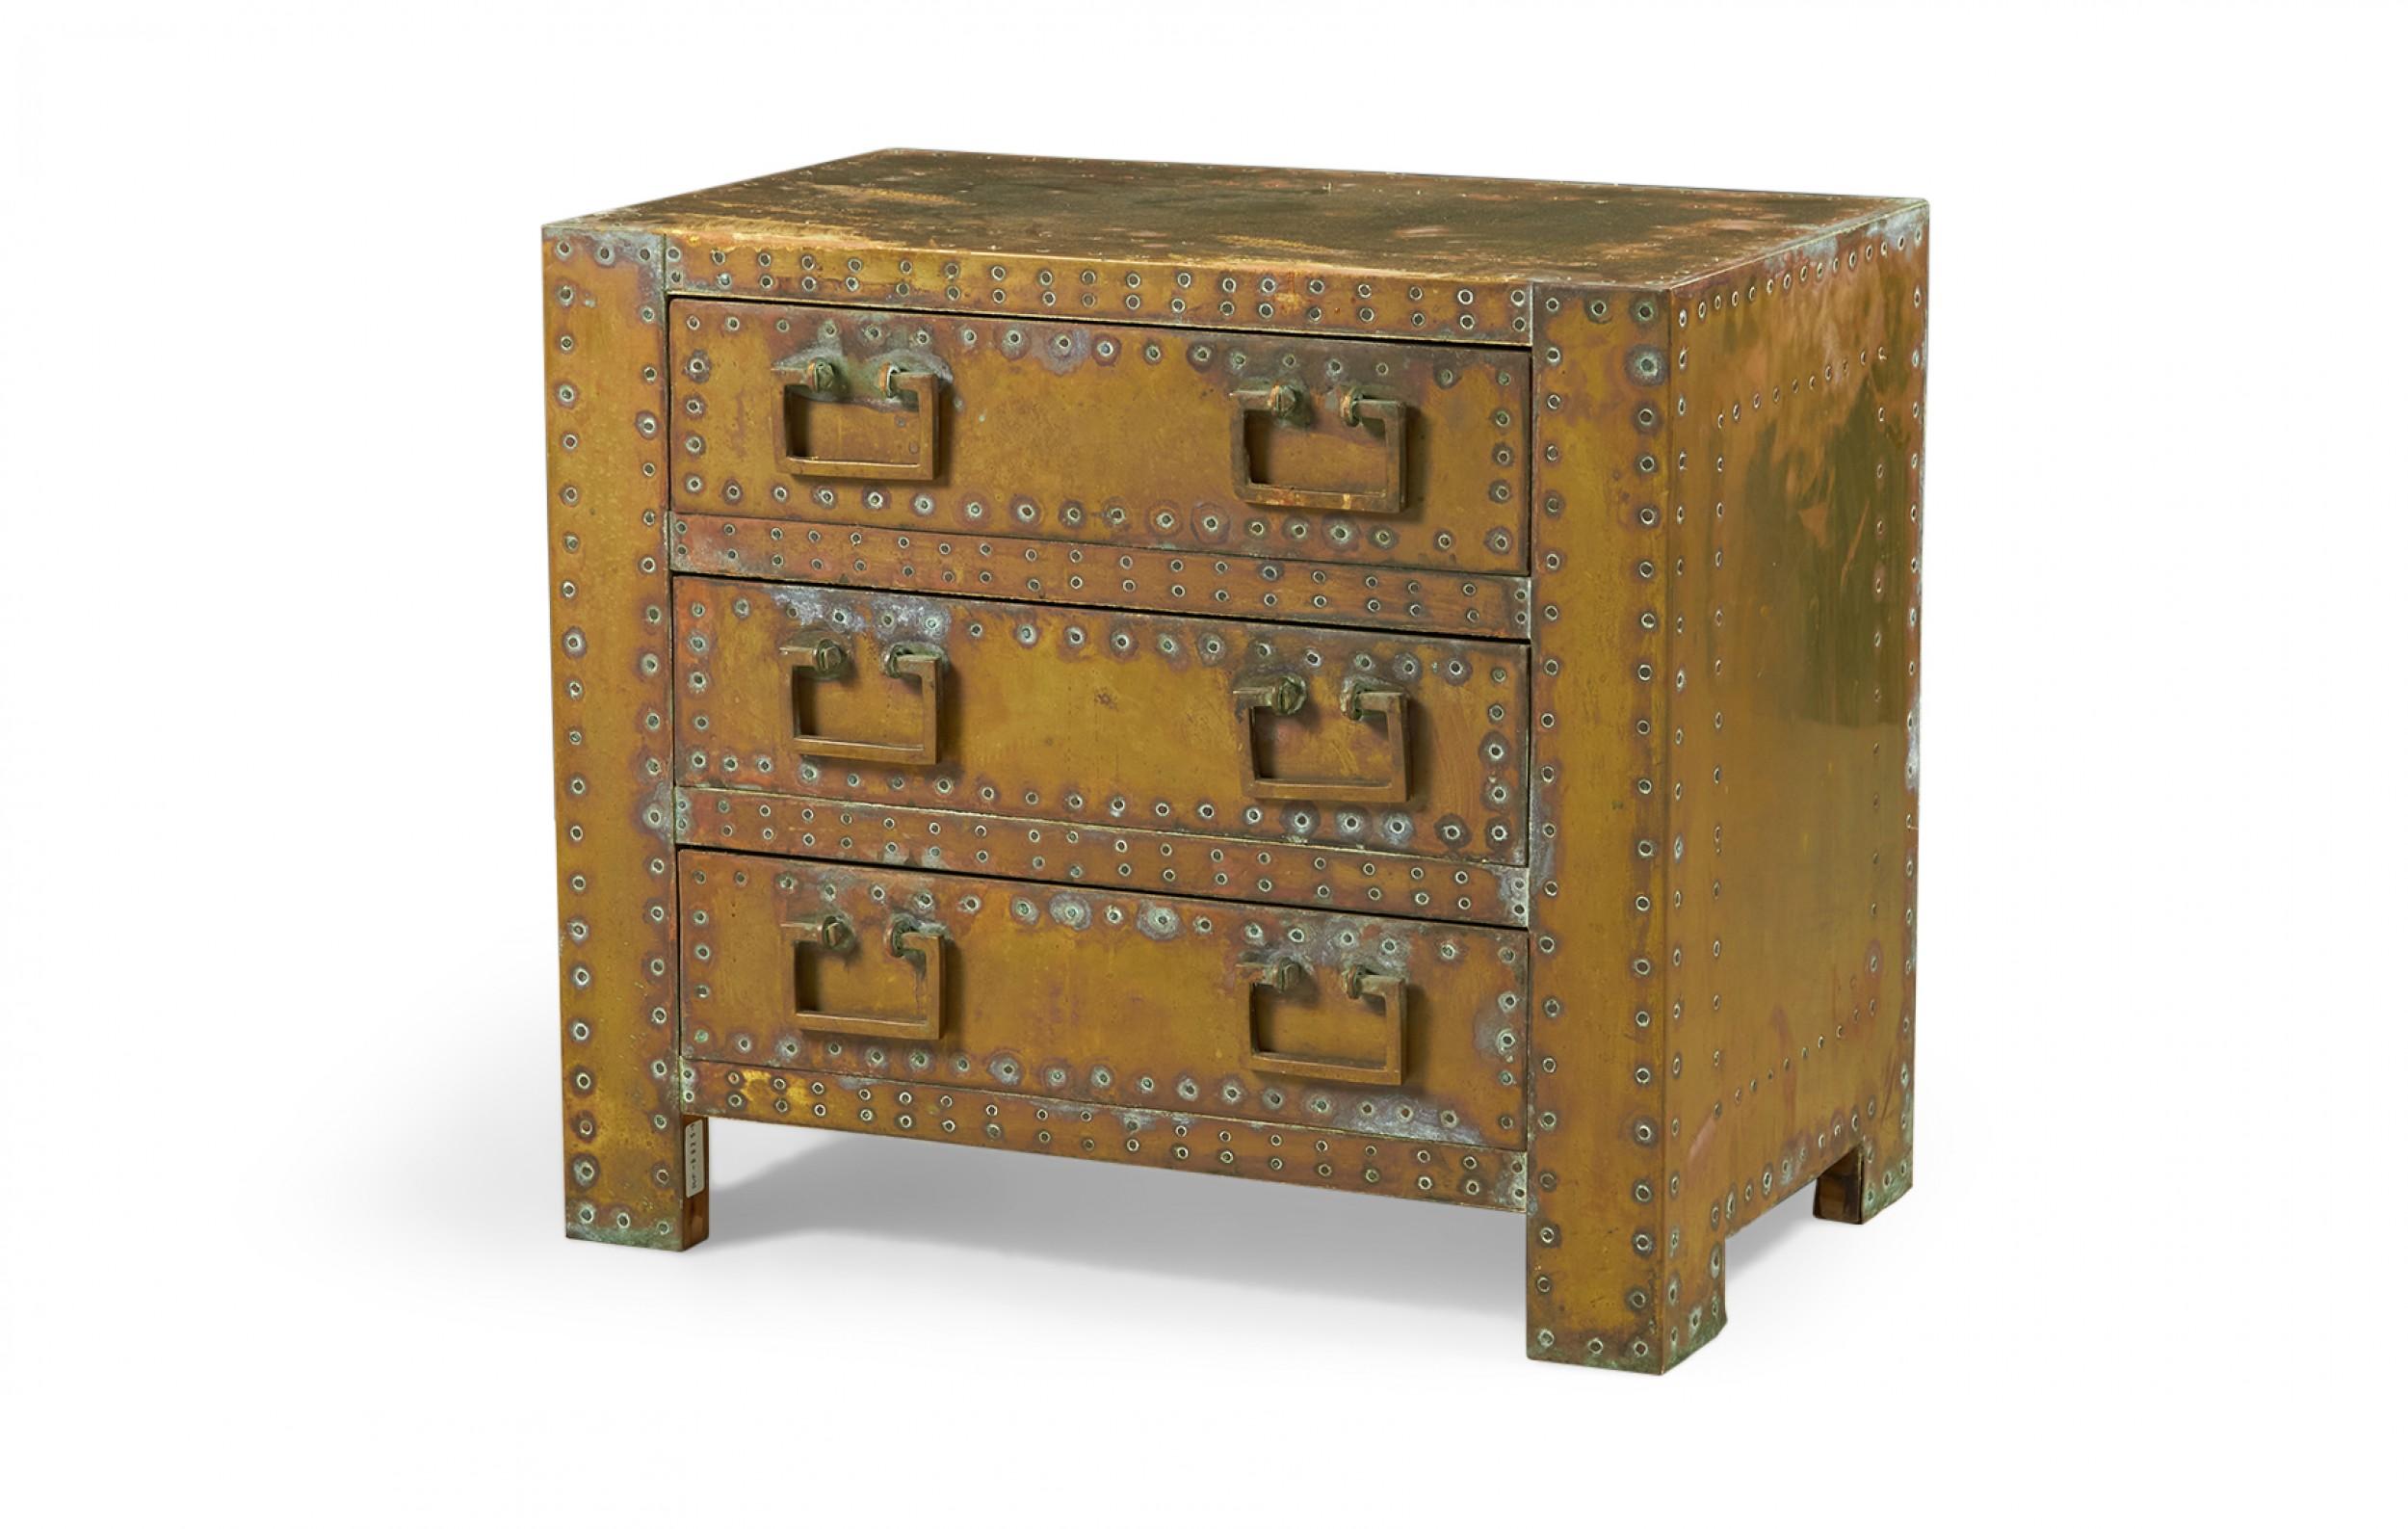 Spanish High Style 'Strongbox' bedside table / commode with brass-clad exterior with natural patina, copper studs, and three drawers with rectangular brass pulls. (SARREID, LTD.) (Similar pieces available with different patinas: DUF0025B-D, similar